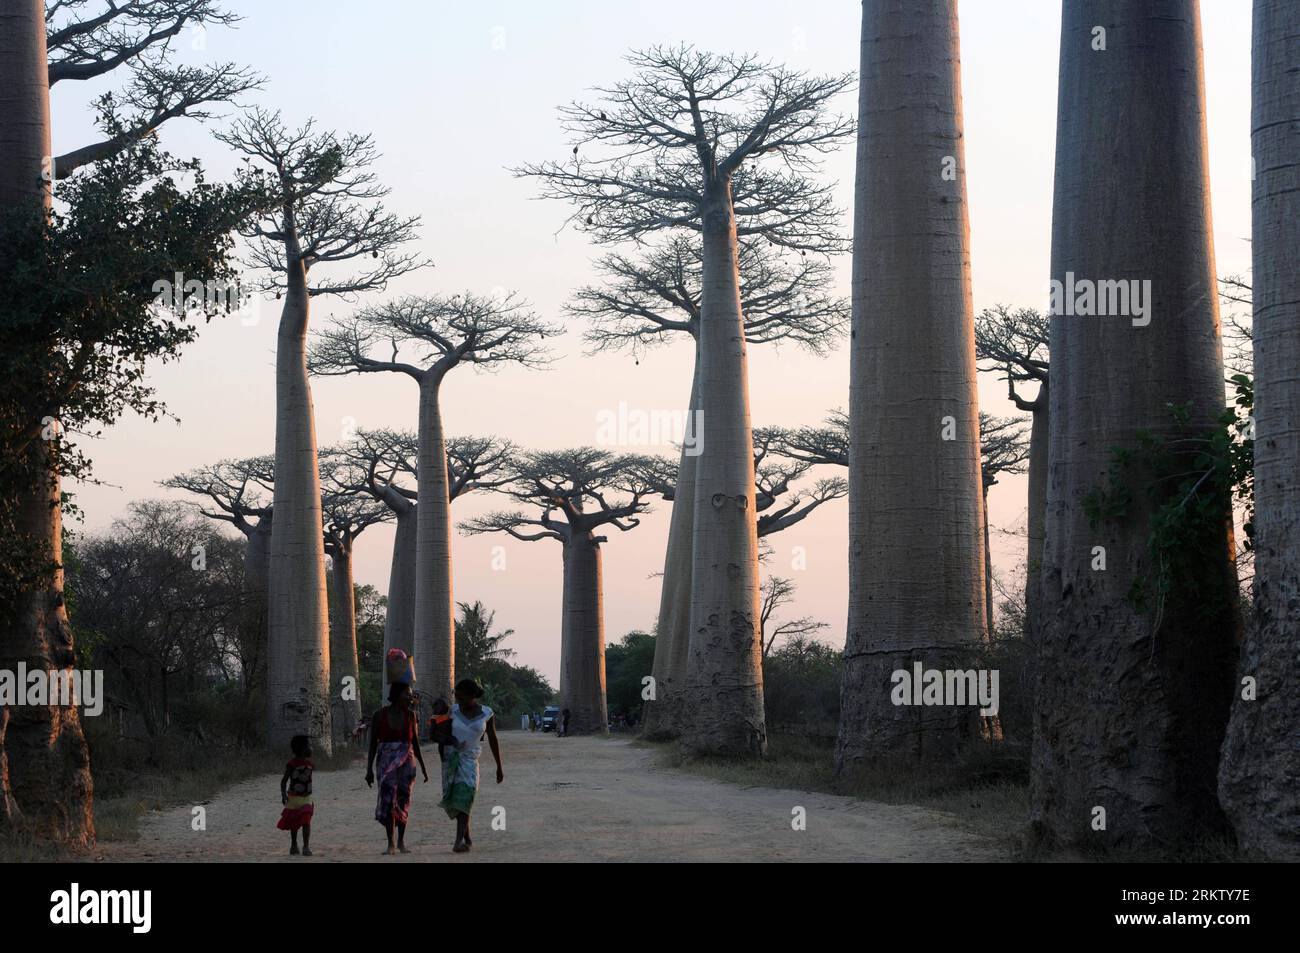 Bildnummer: 58567303  Datum: 07.10.2012  Copyright: imago/Xinhua People walk in the avenue of the baobabs in the Menabe region, west of Madagascar on Oct. 7, 2012. The baobab tree is a symbol of Madagascar and the avenue of the baobabs is one of the most visted places in Madagascar. (Xinhua/He Xianfeng) (bxq) MADAGASCAR-MENABE-BAOBABS PUBLICATIONxNOTxINxCHN Reisen Madagaskar Afrika Baobab Baum xjh x0x 2012 quer     58567303 Date 07 10 2012 Copyright Imago XINHUA Celebrities Walk in The Avenue of The Baobabs in The  Region WEST of MADAGASCAR ON OCT 7 2012 The Baobab Tree IS a symbol of MADAGASC Stock Photo